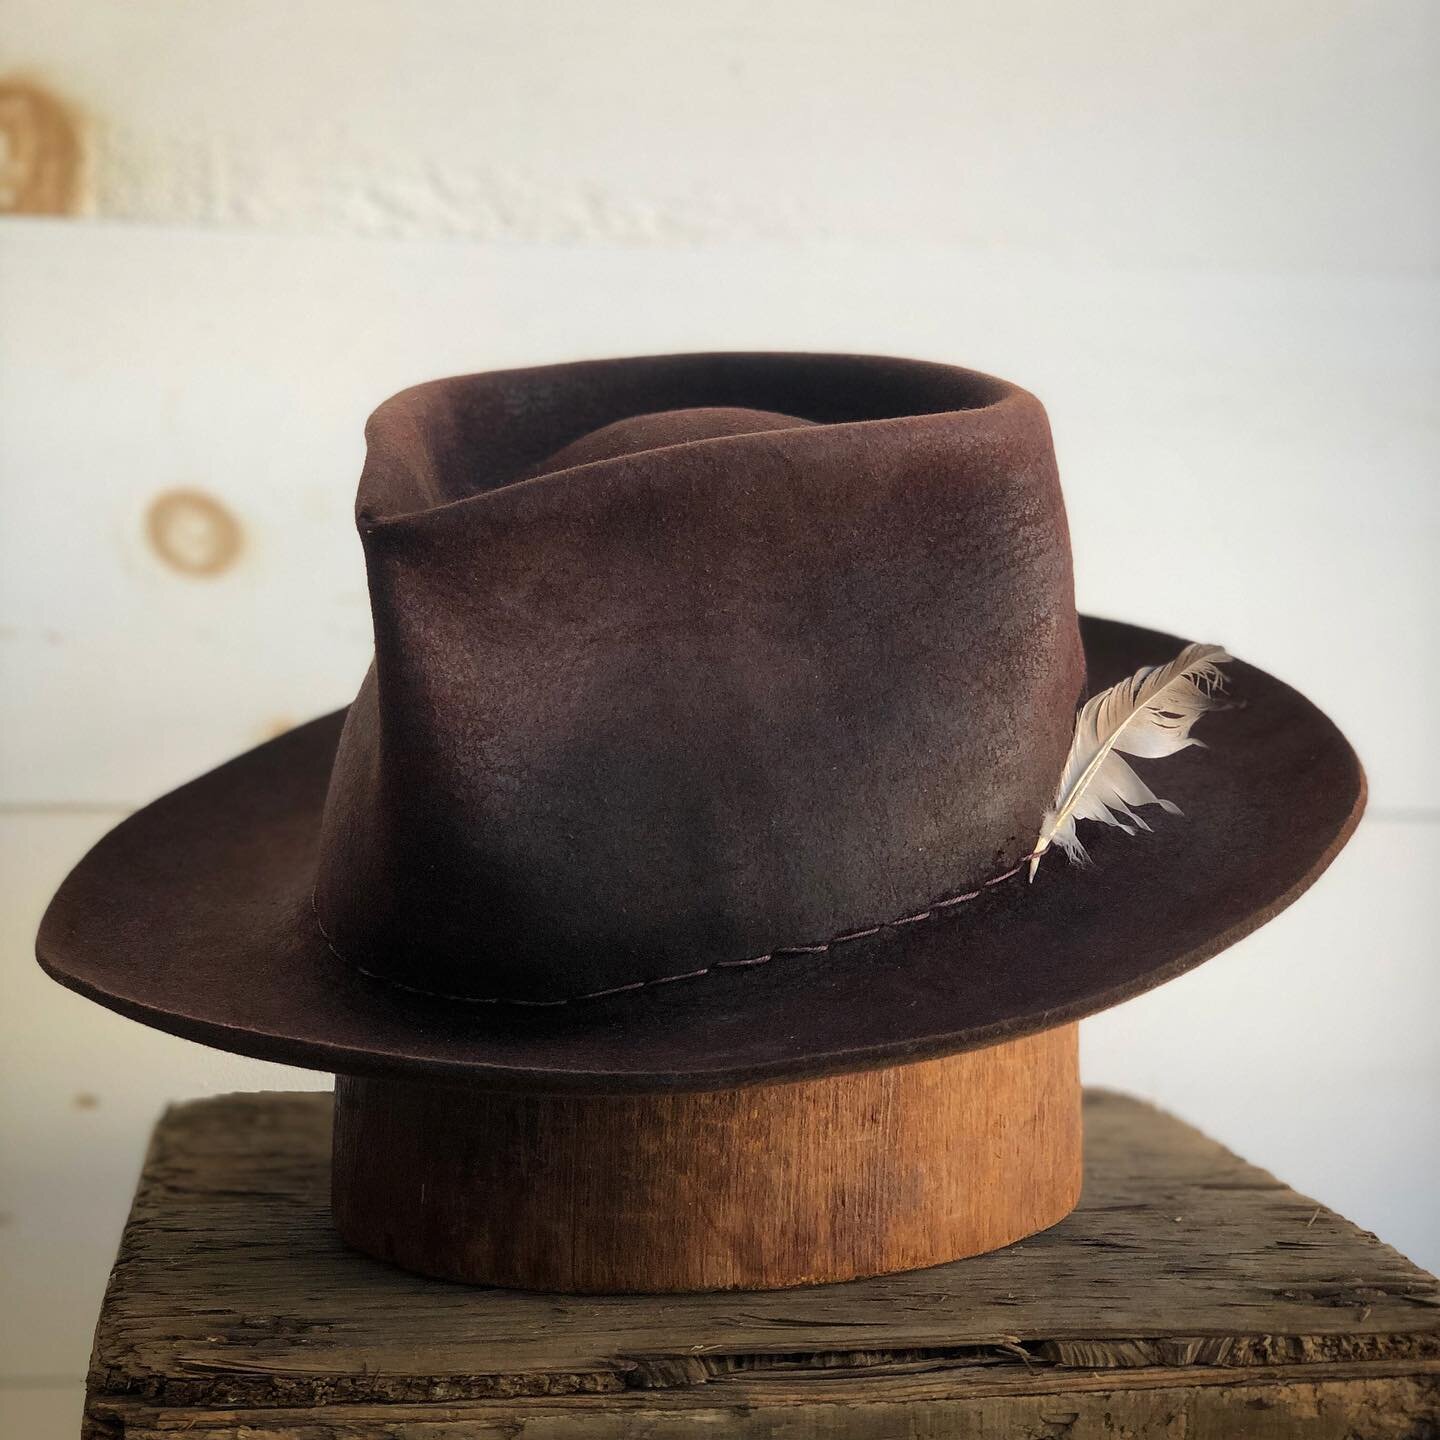 Early hat made from scratch &bull; for myself, many moons ago #appalachiablues